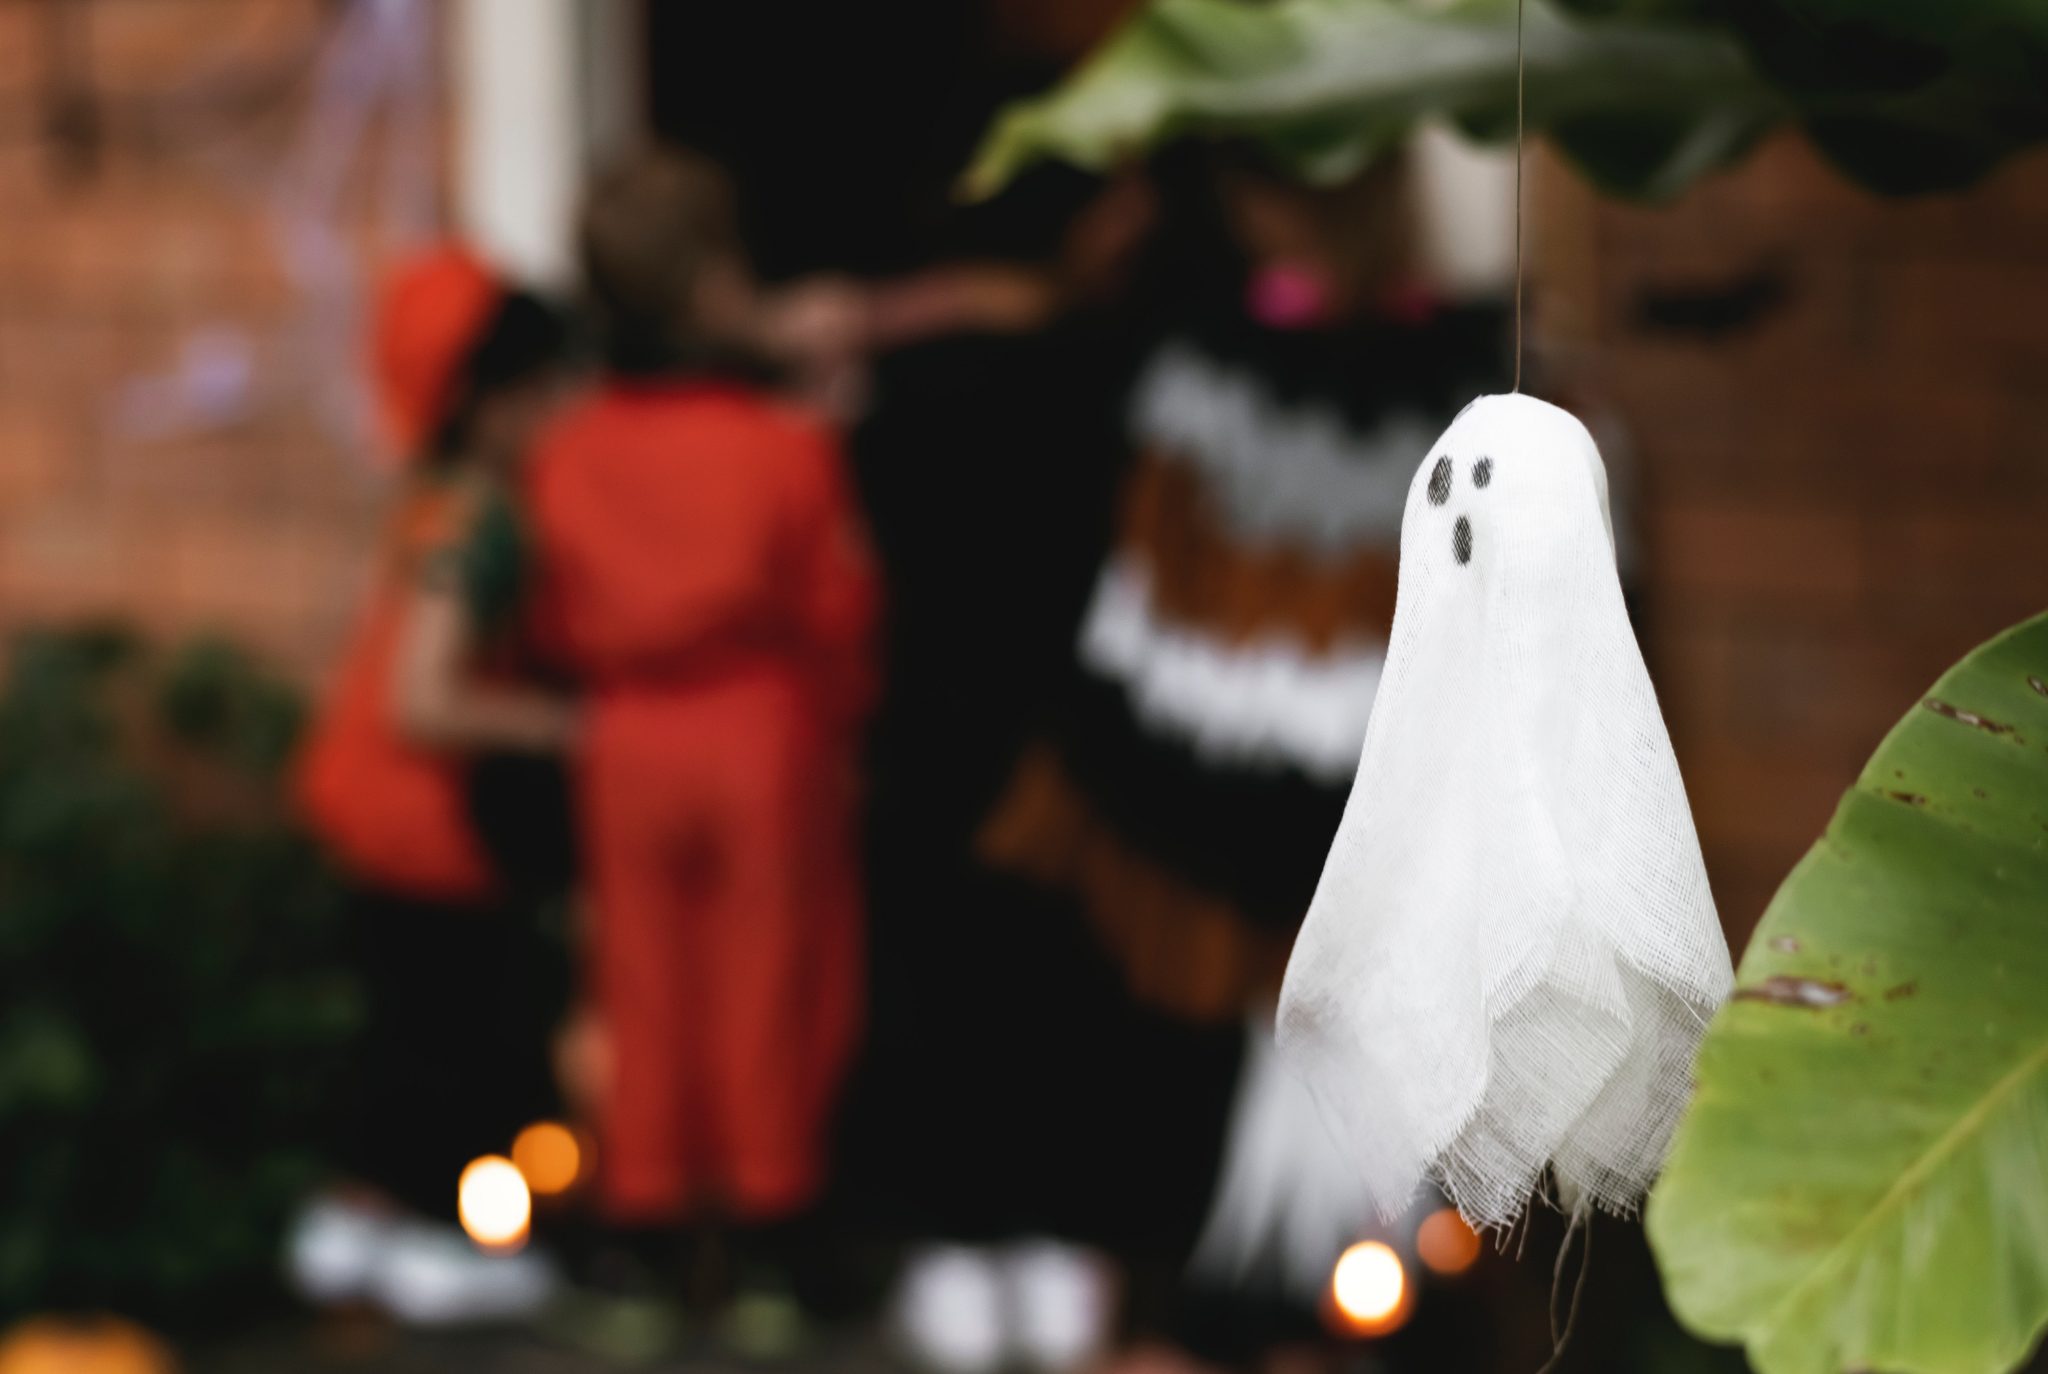 Ghost decoration in foreground of kids trick-or-treating